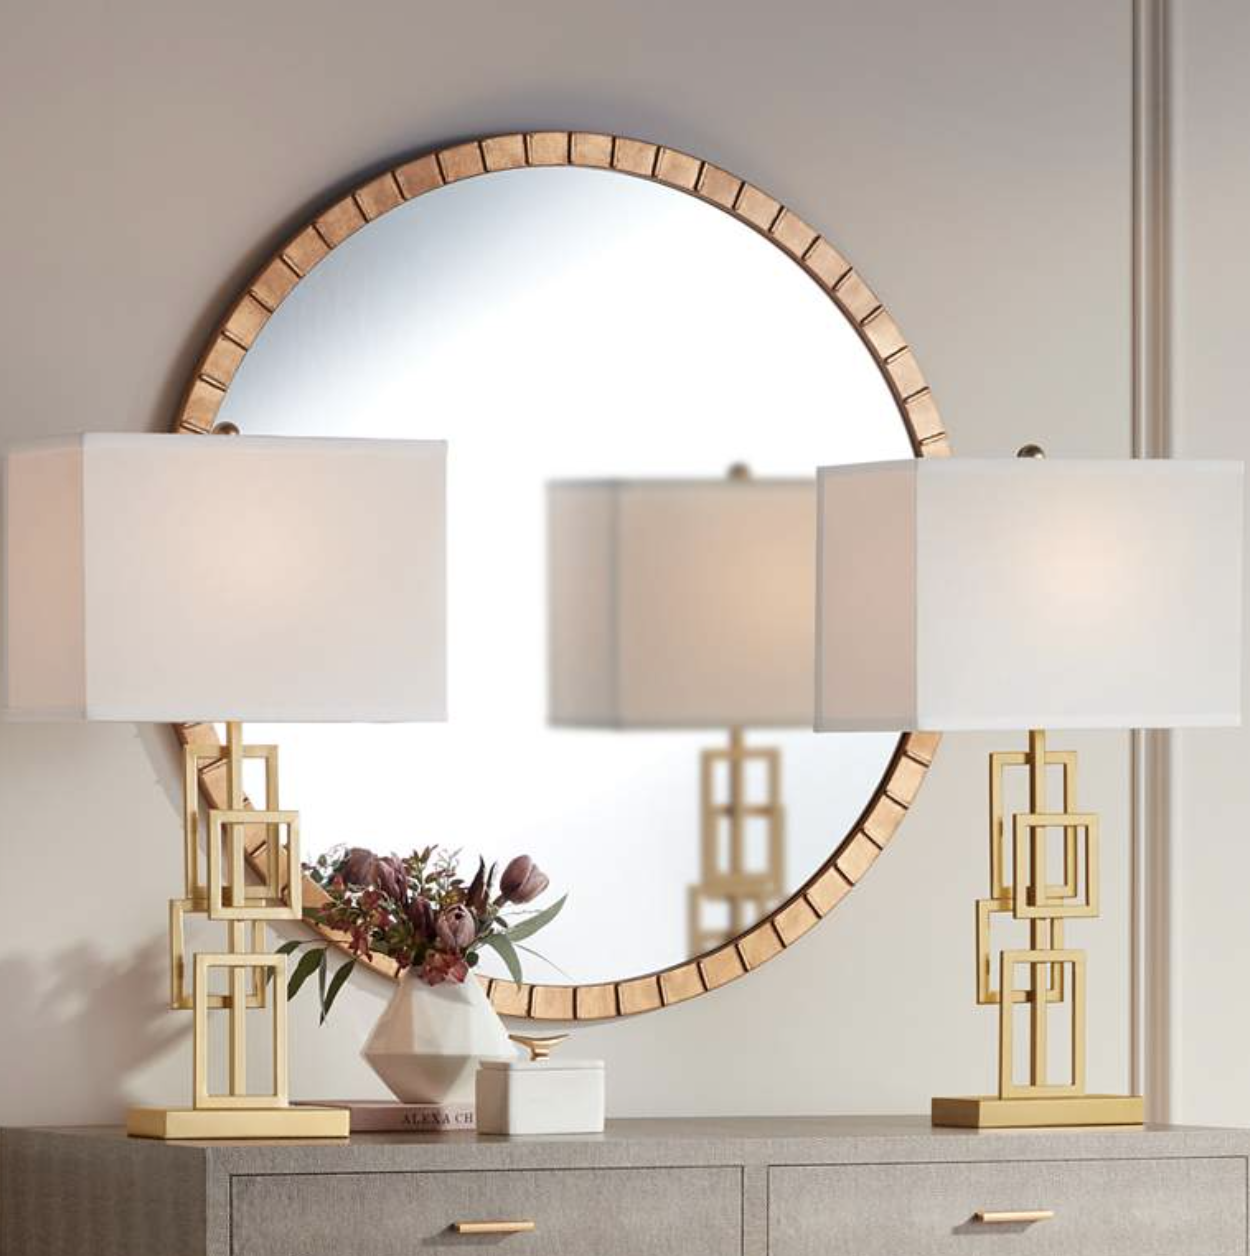 set of gale golden grid table lamps sitting on a dresser in front of a circular wall mirror